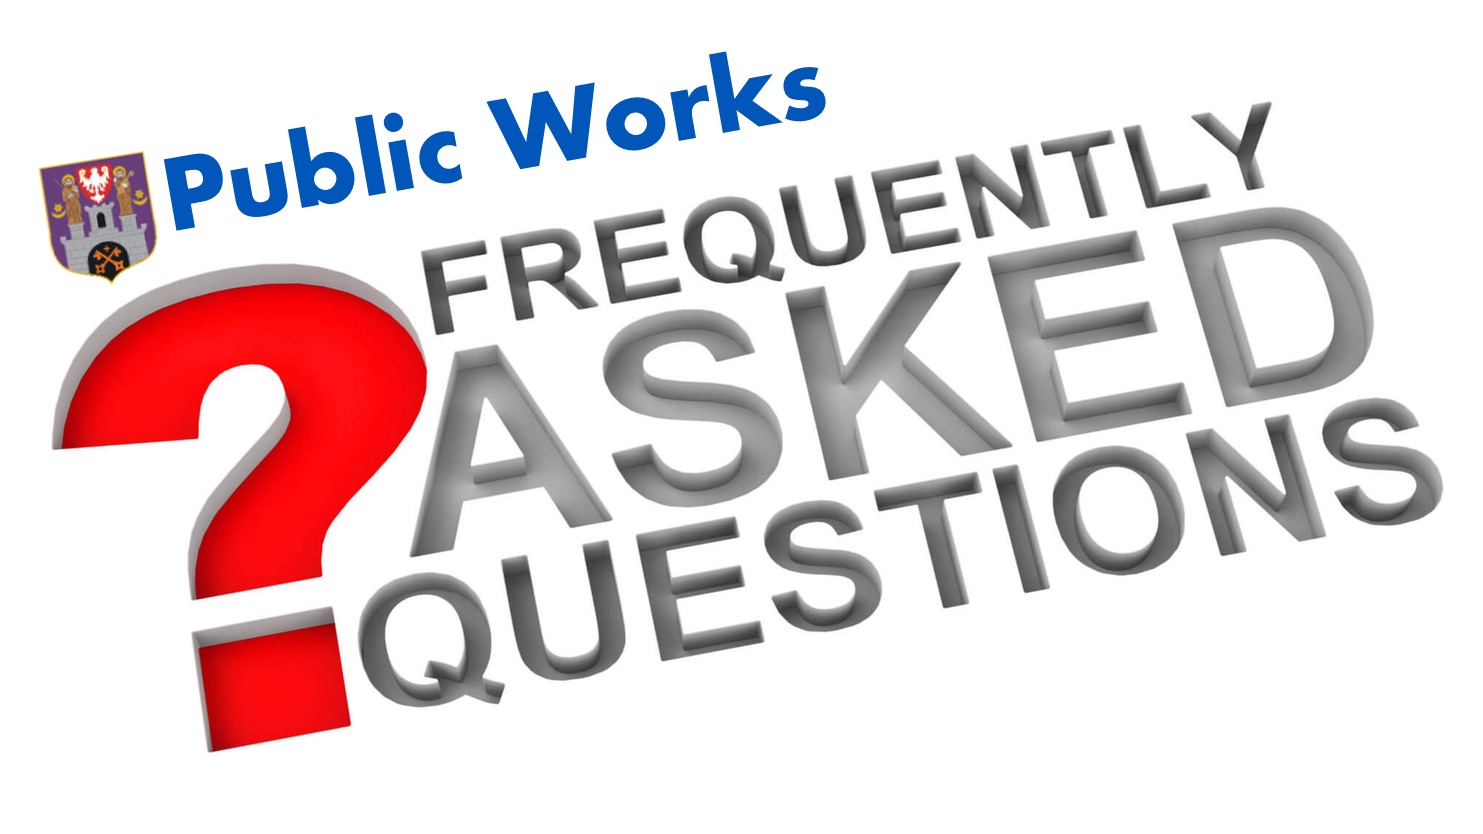 Public Works frequently asked questions